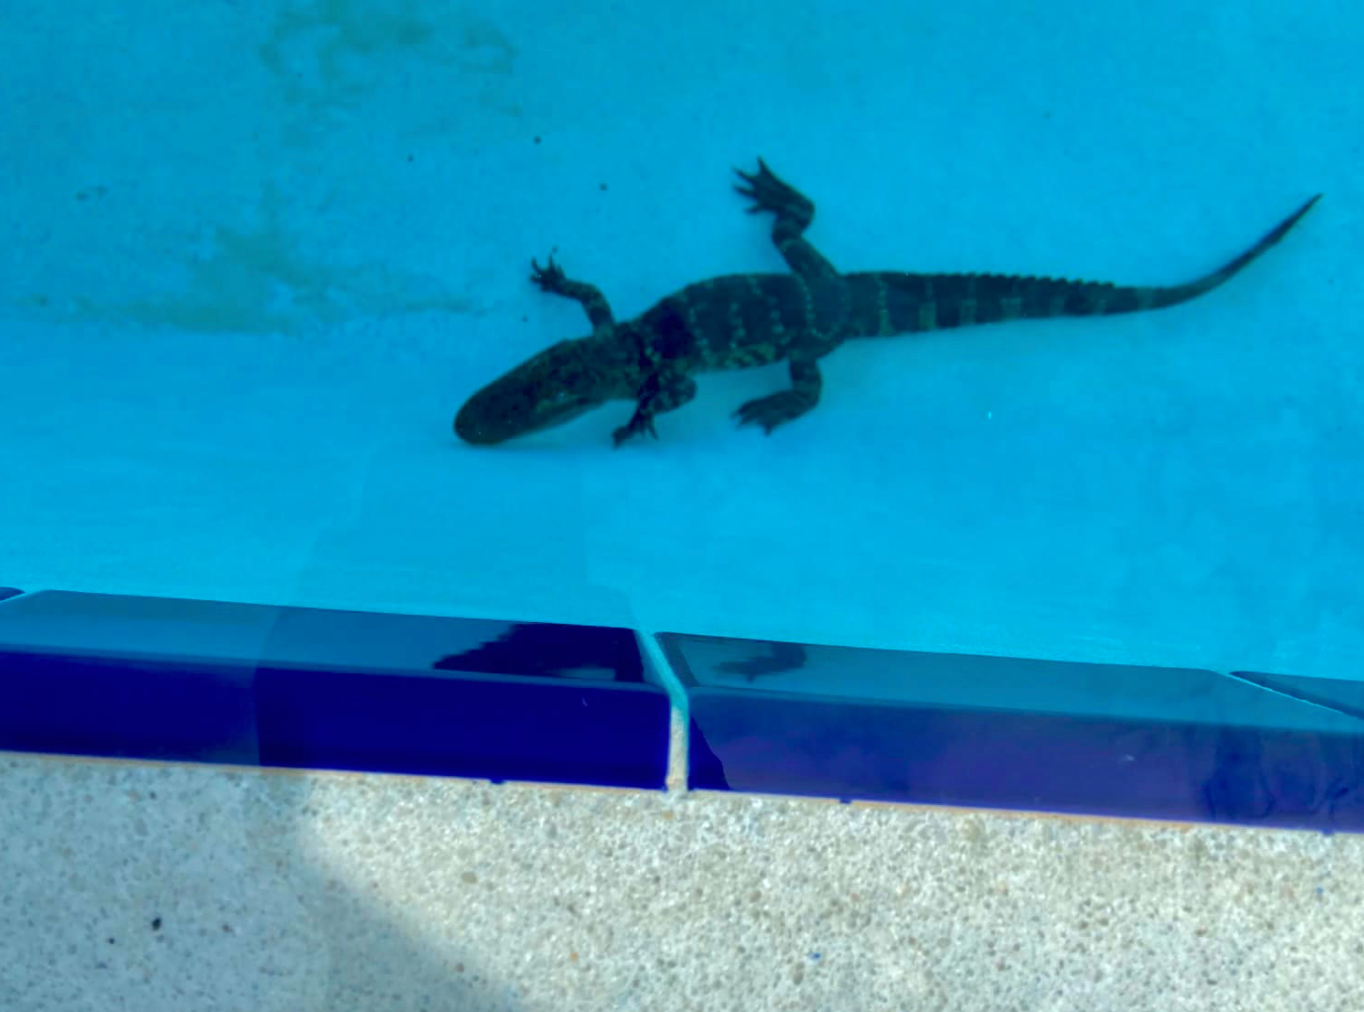 Police in Montverde, Florida removed a baby alligator from a school swimming pool